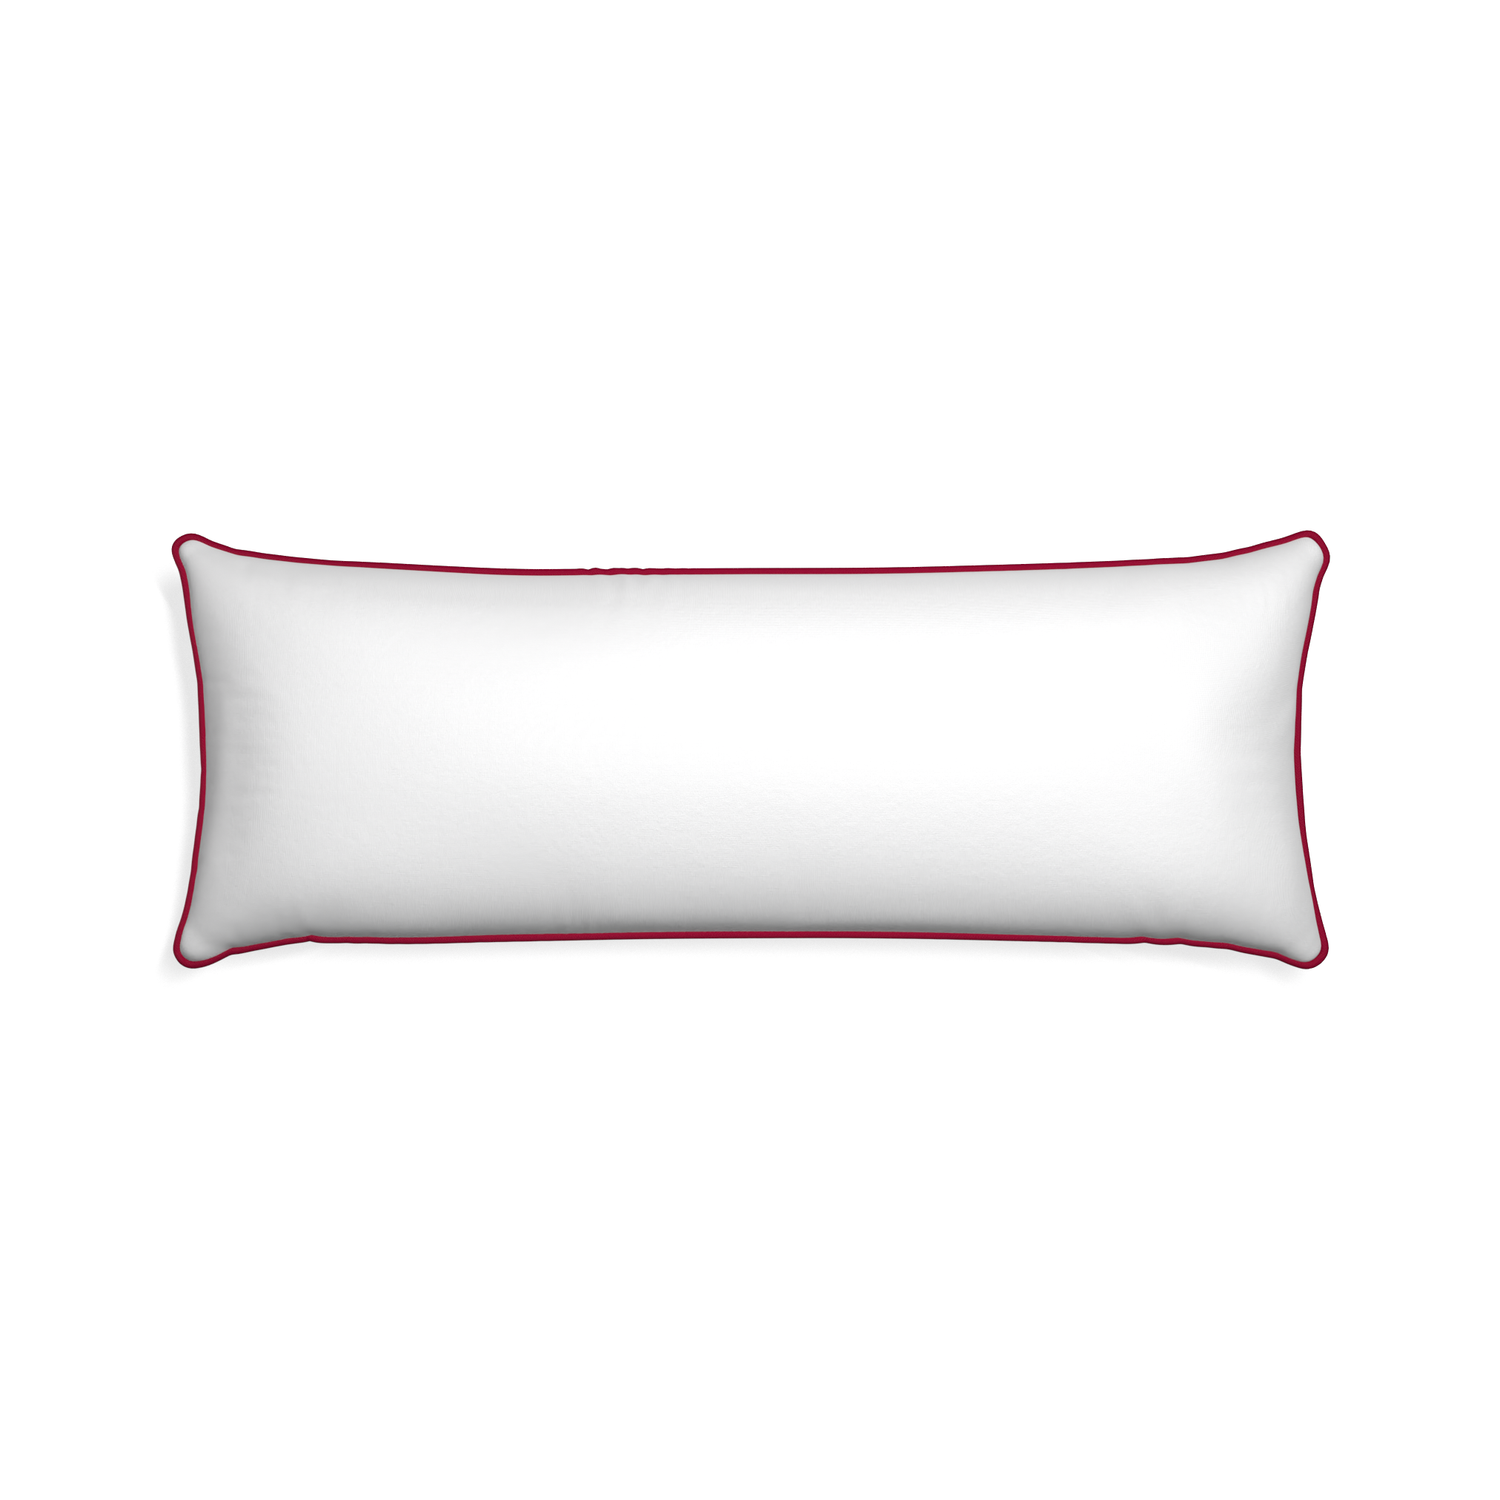 Xl-lumbar snow custom white cottonpillow with raspberry piping on white background